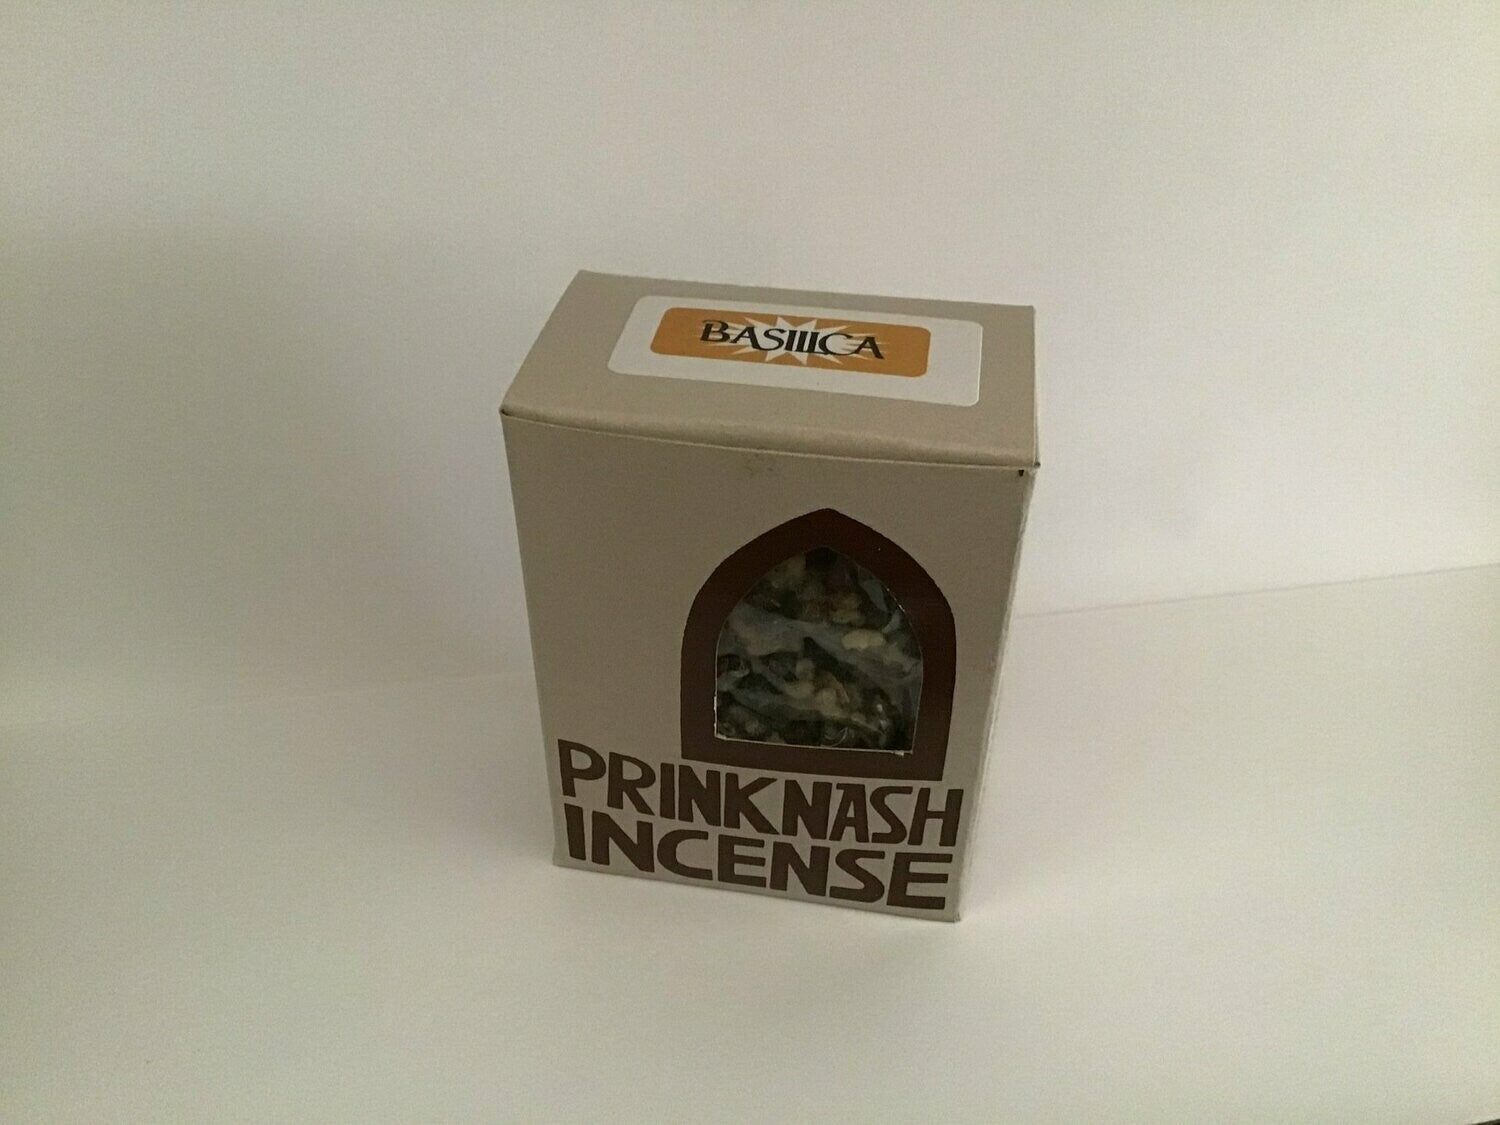 50g Genuine Prinknash Abbey Resin Incense with Quick light Charcoal - Basilica 2